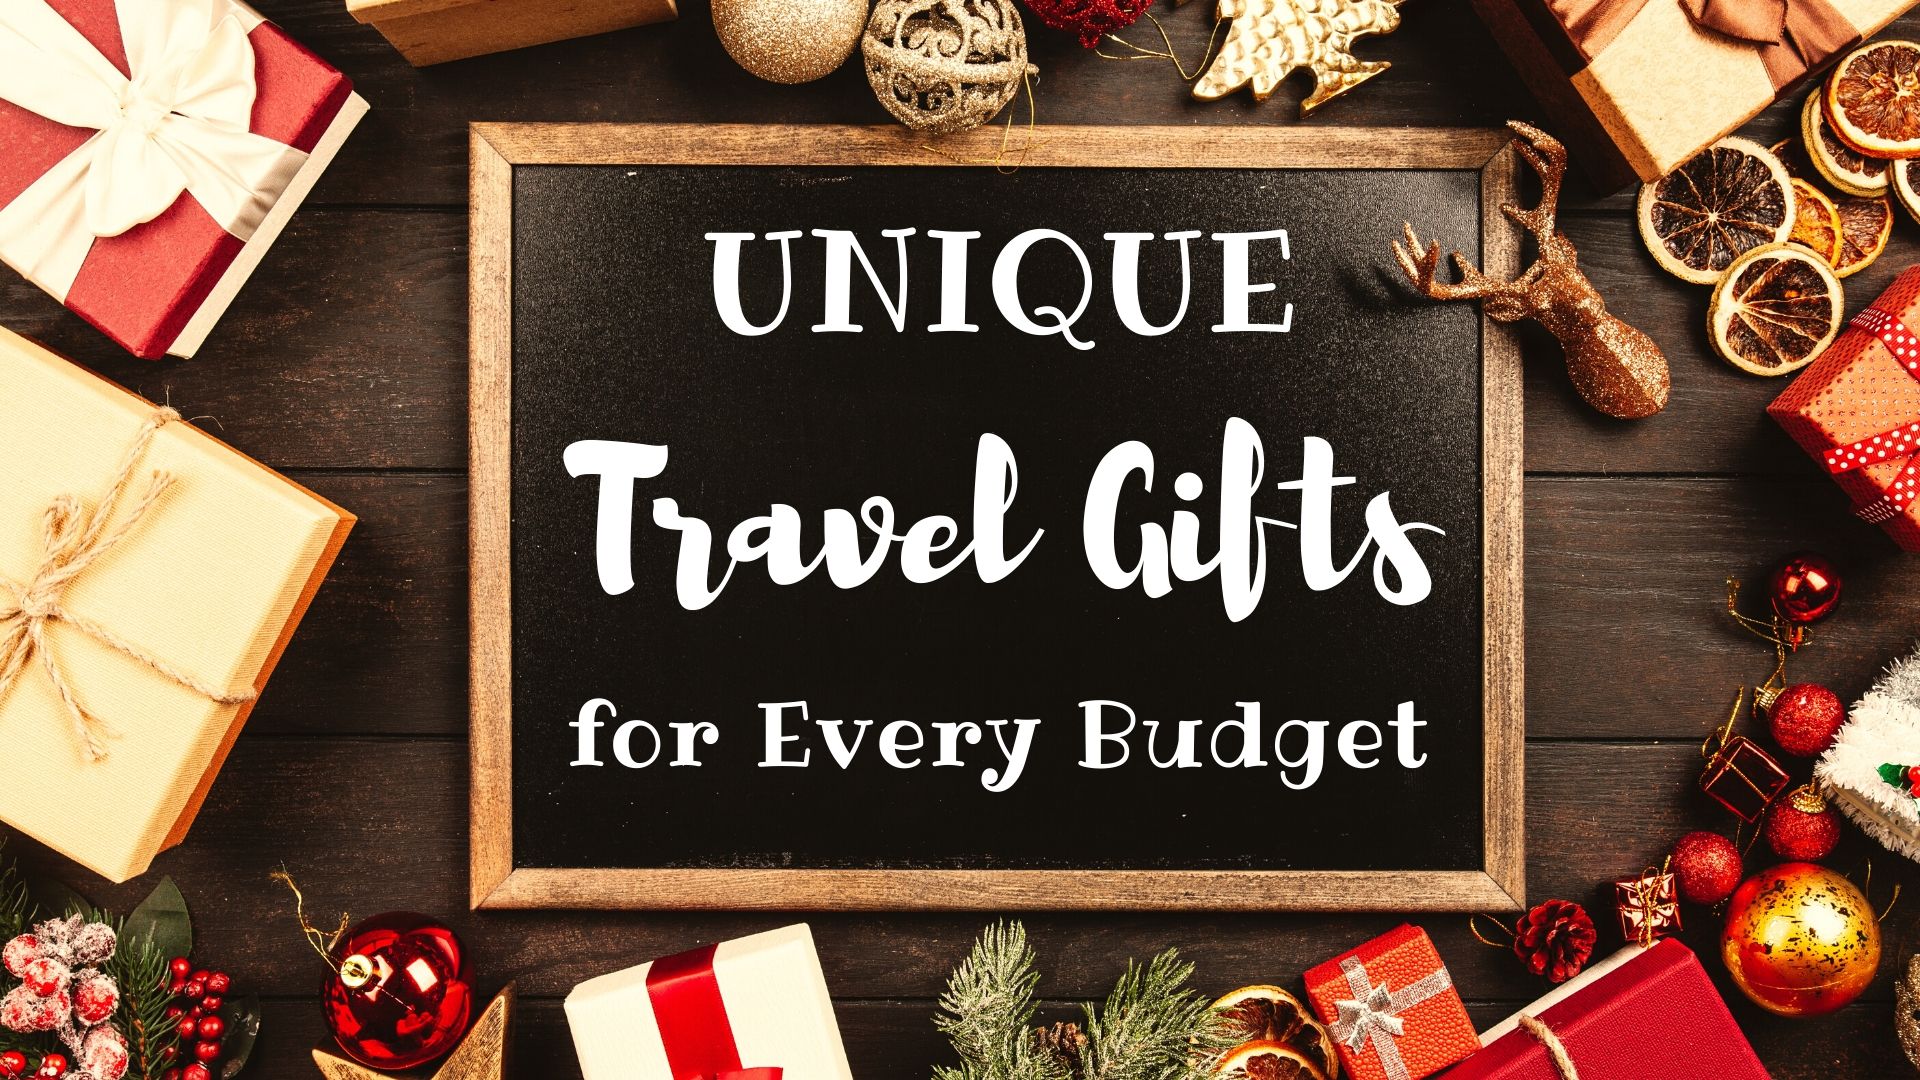 Unique travel gifts for christmas, unique travel gifts for any budget, unique travel gifts for every budget, unique travel gifts under $10, unique travel gifts under $25, unique travel gifts under $50, unique travel gifts over $100